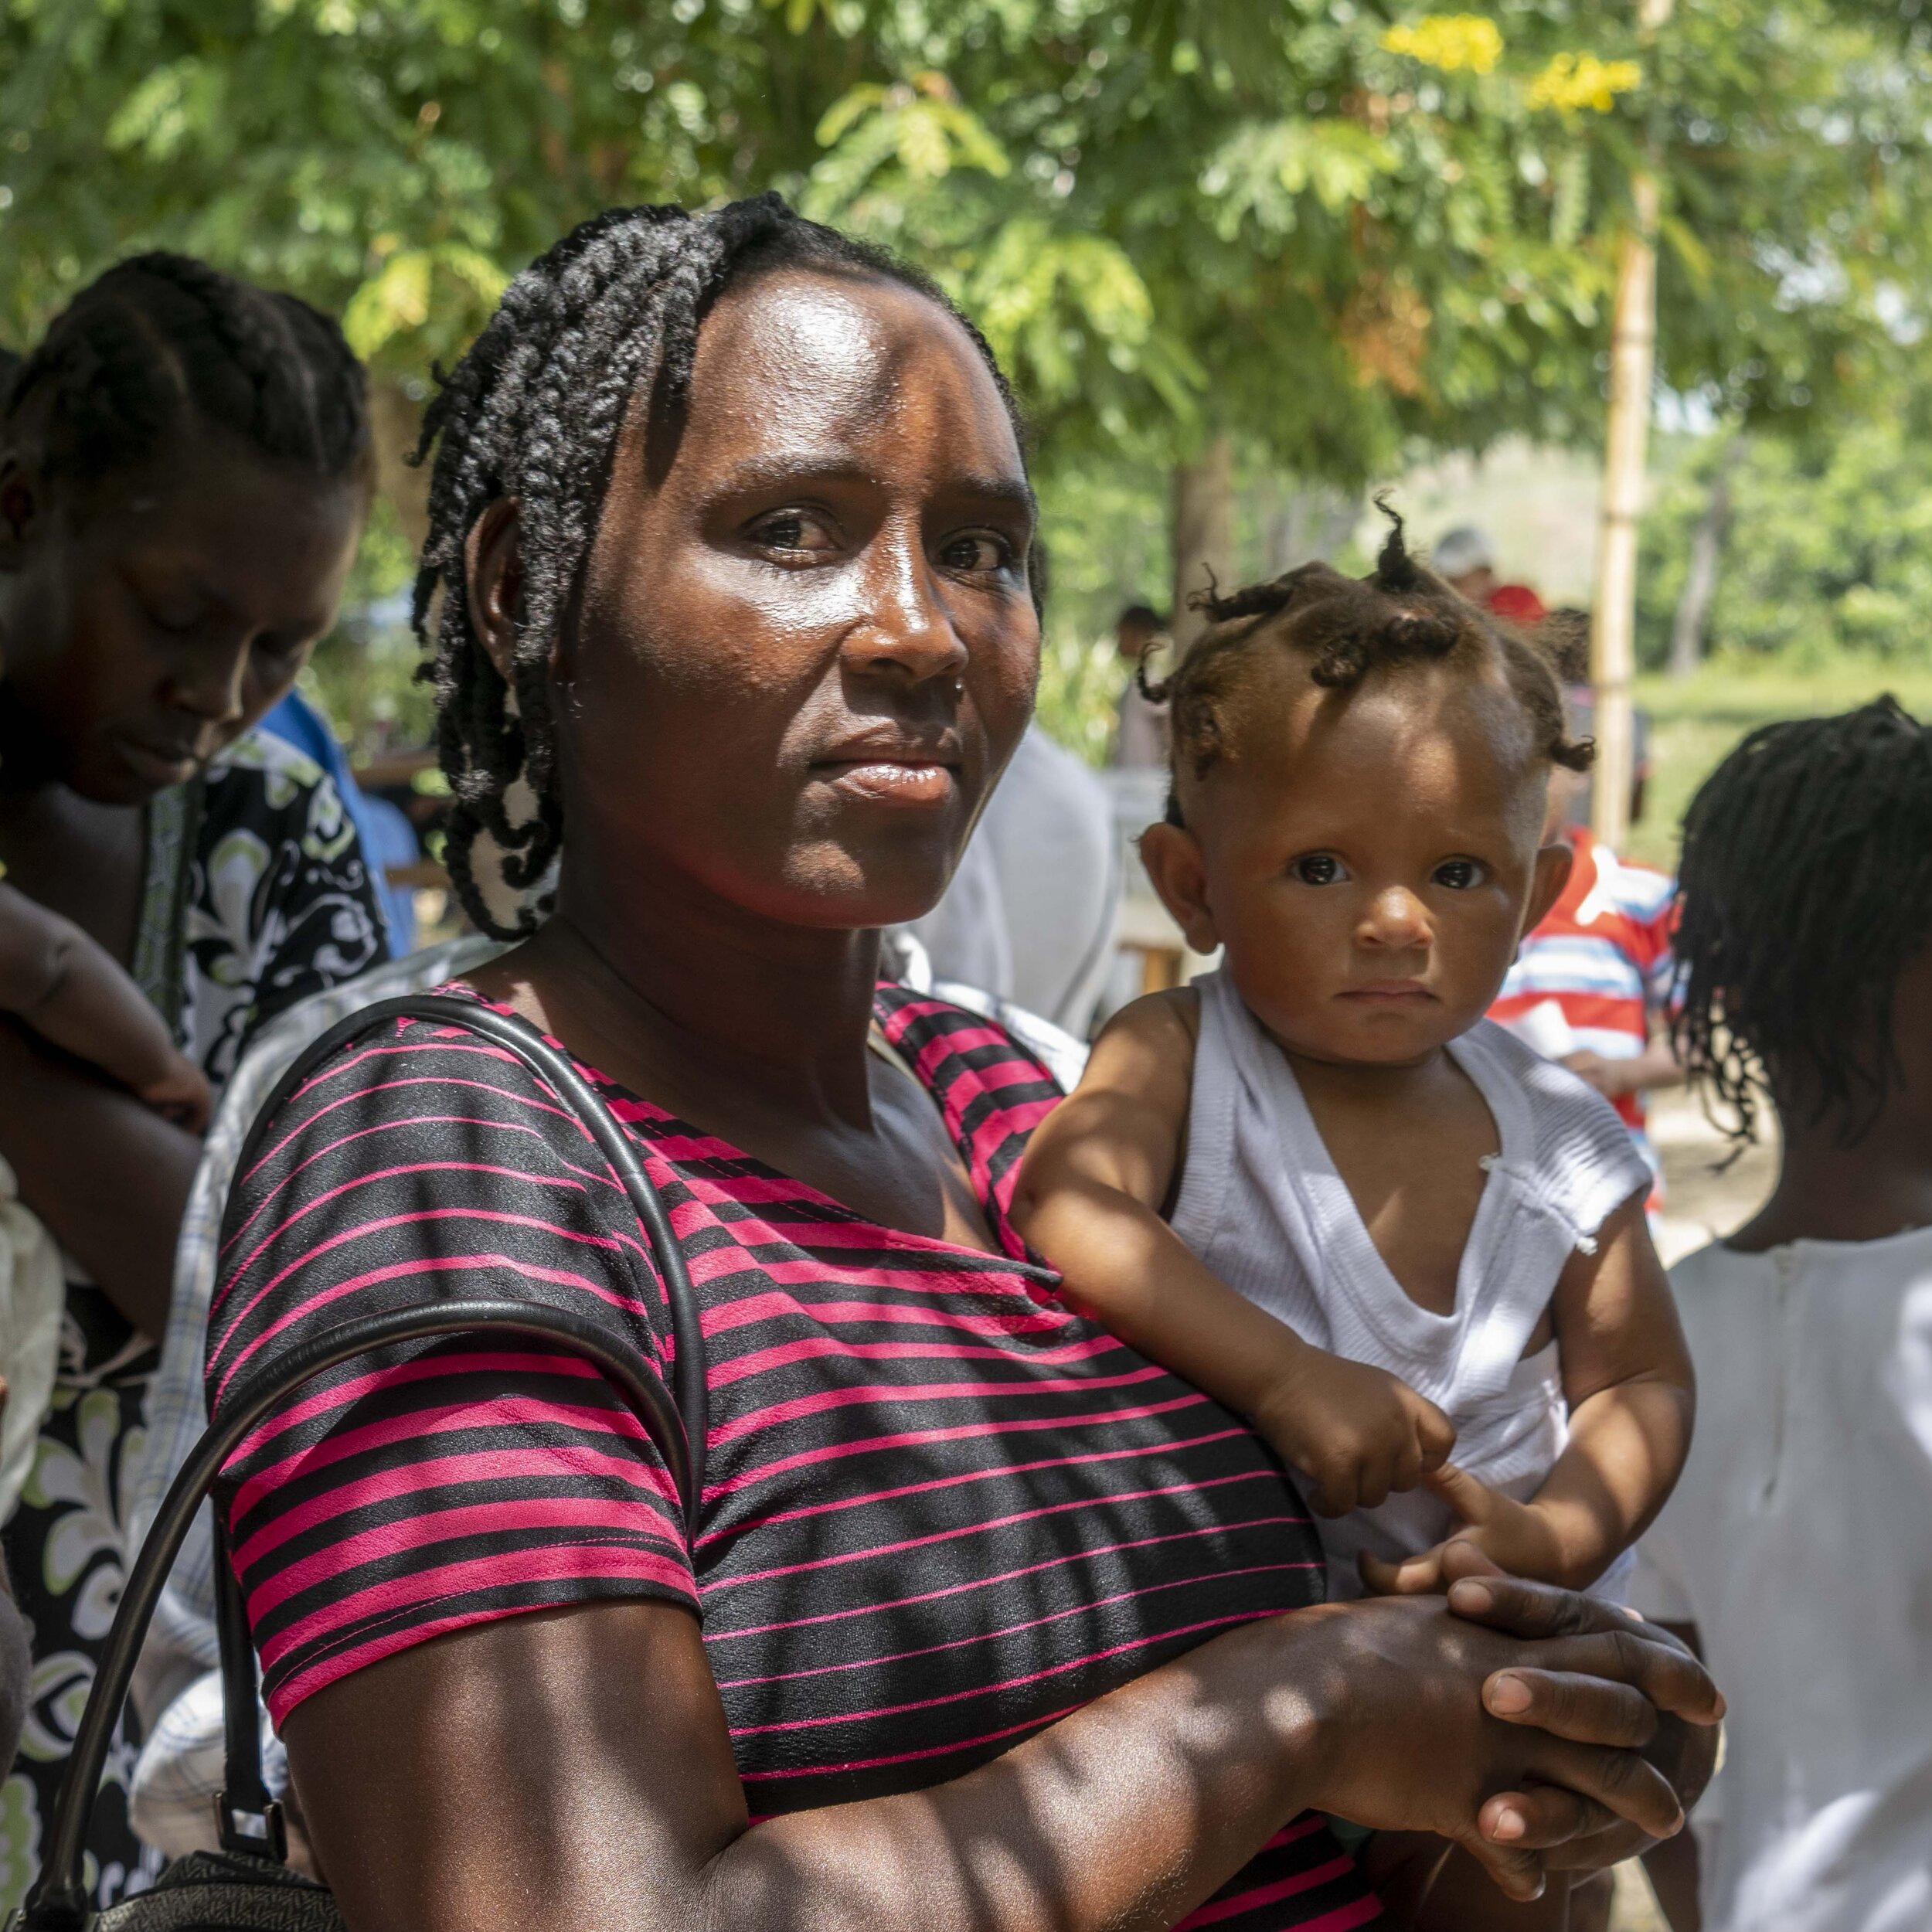 As developments continue to unfold in Haiti, we&rsquo;ve received an outpouring of support and inquiries about how our organization is doing during these difficult times.

We&rsquo;re pleased to report that as of today, both health clinics and matern